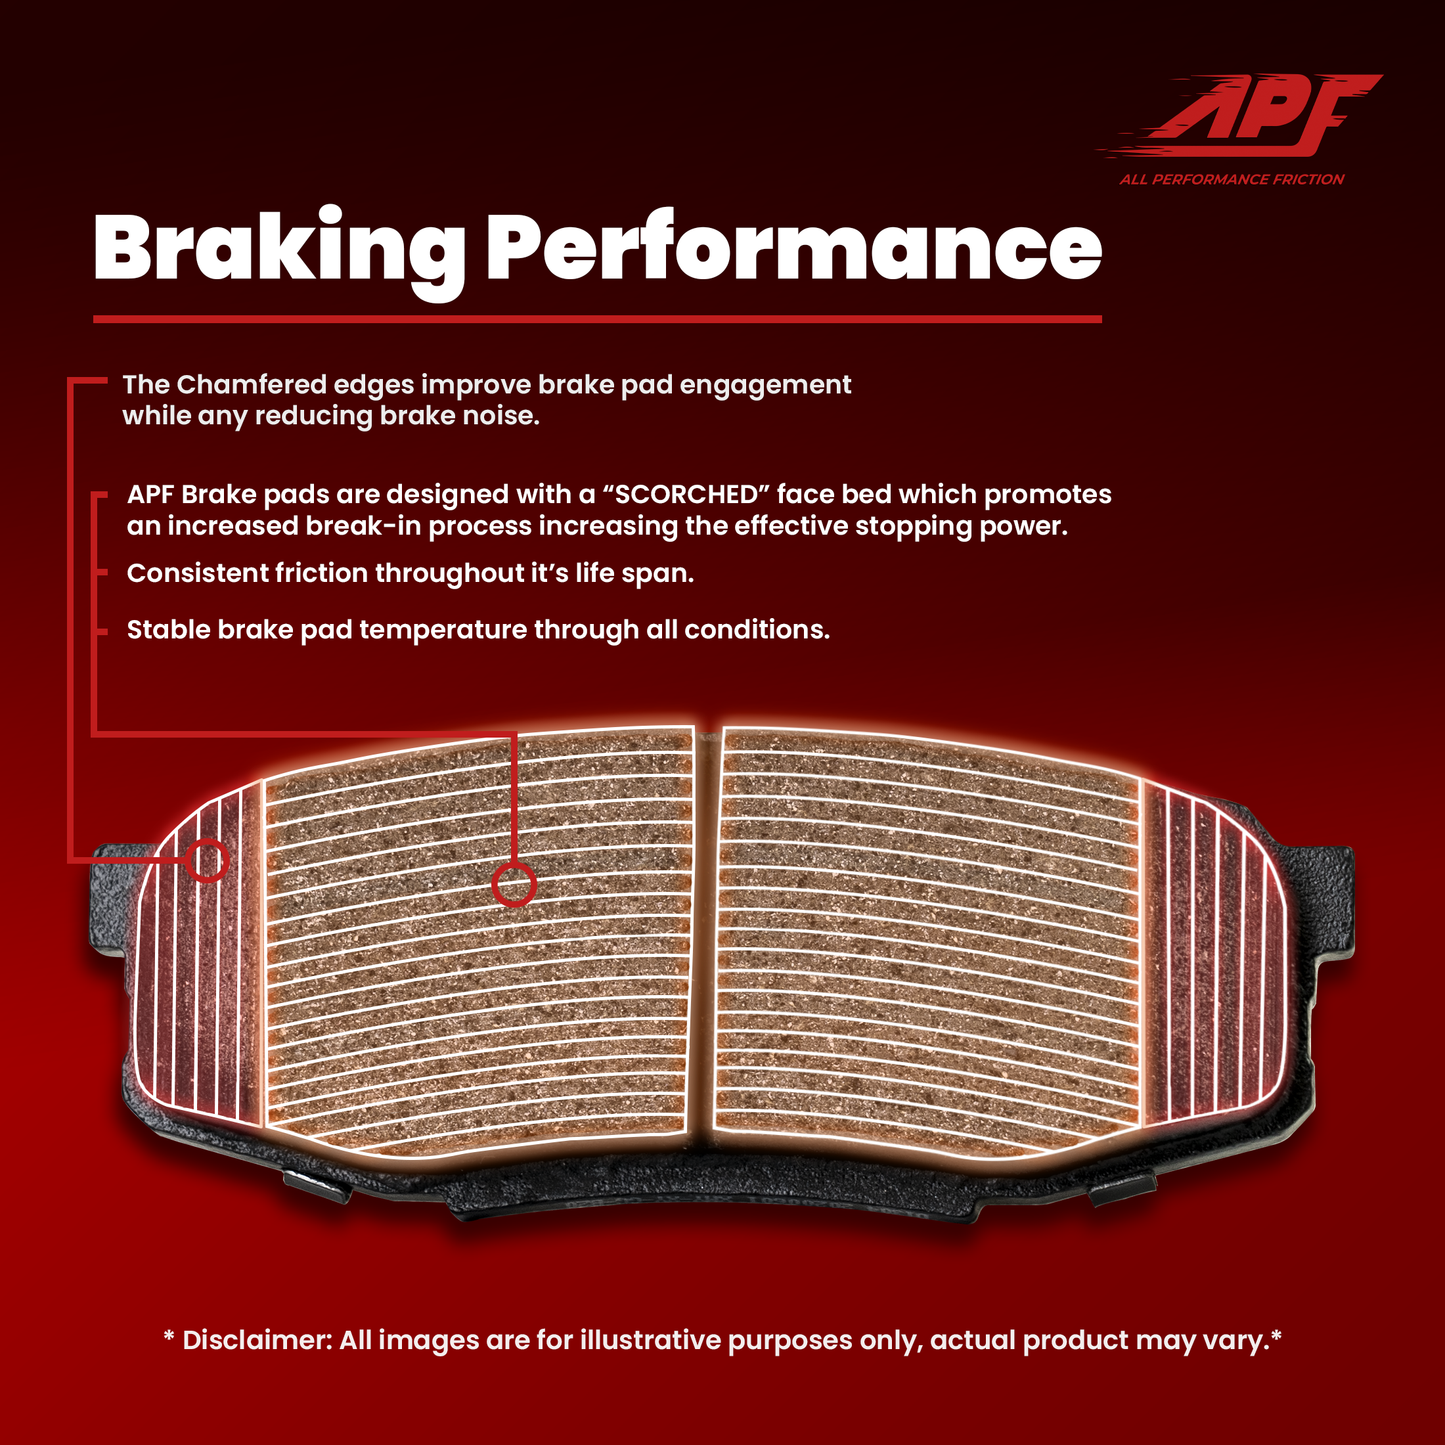 APF All Performance Friction Front and Rear Rotors and Pads Full Kit compatible with Toyota Tundra 2007-2021 Zinc Drilled Slotted Rotors with Ceramic Carbon Fiber Brake Pads | $378.76